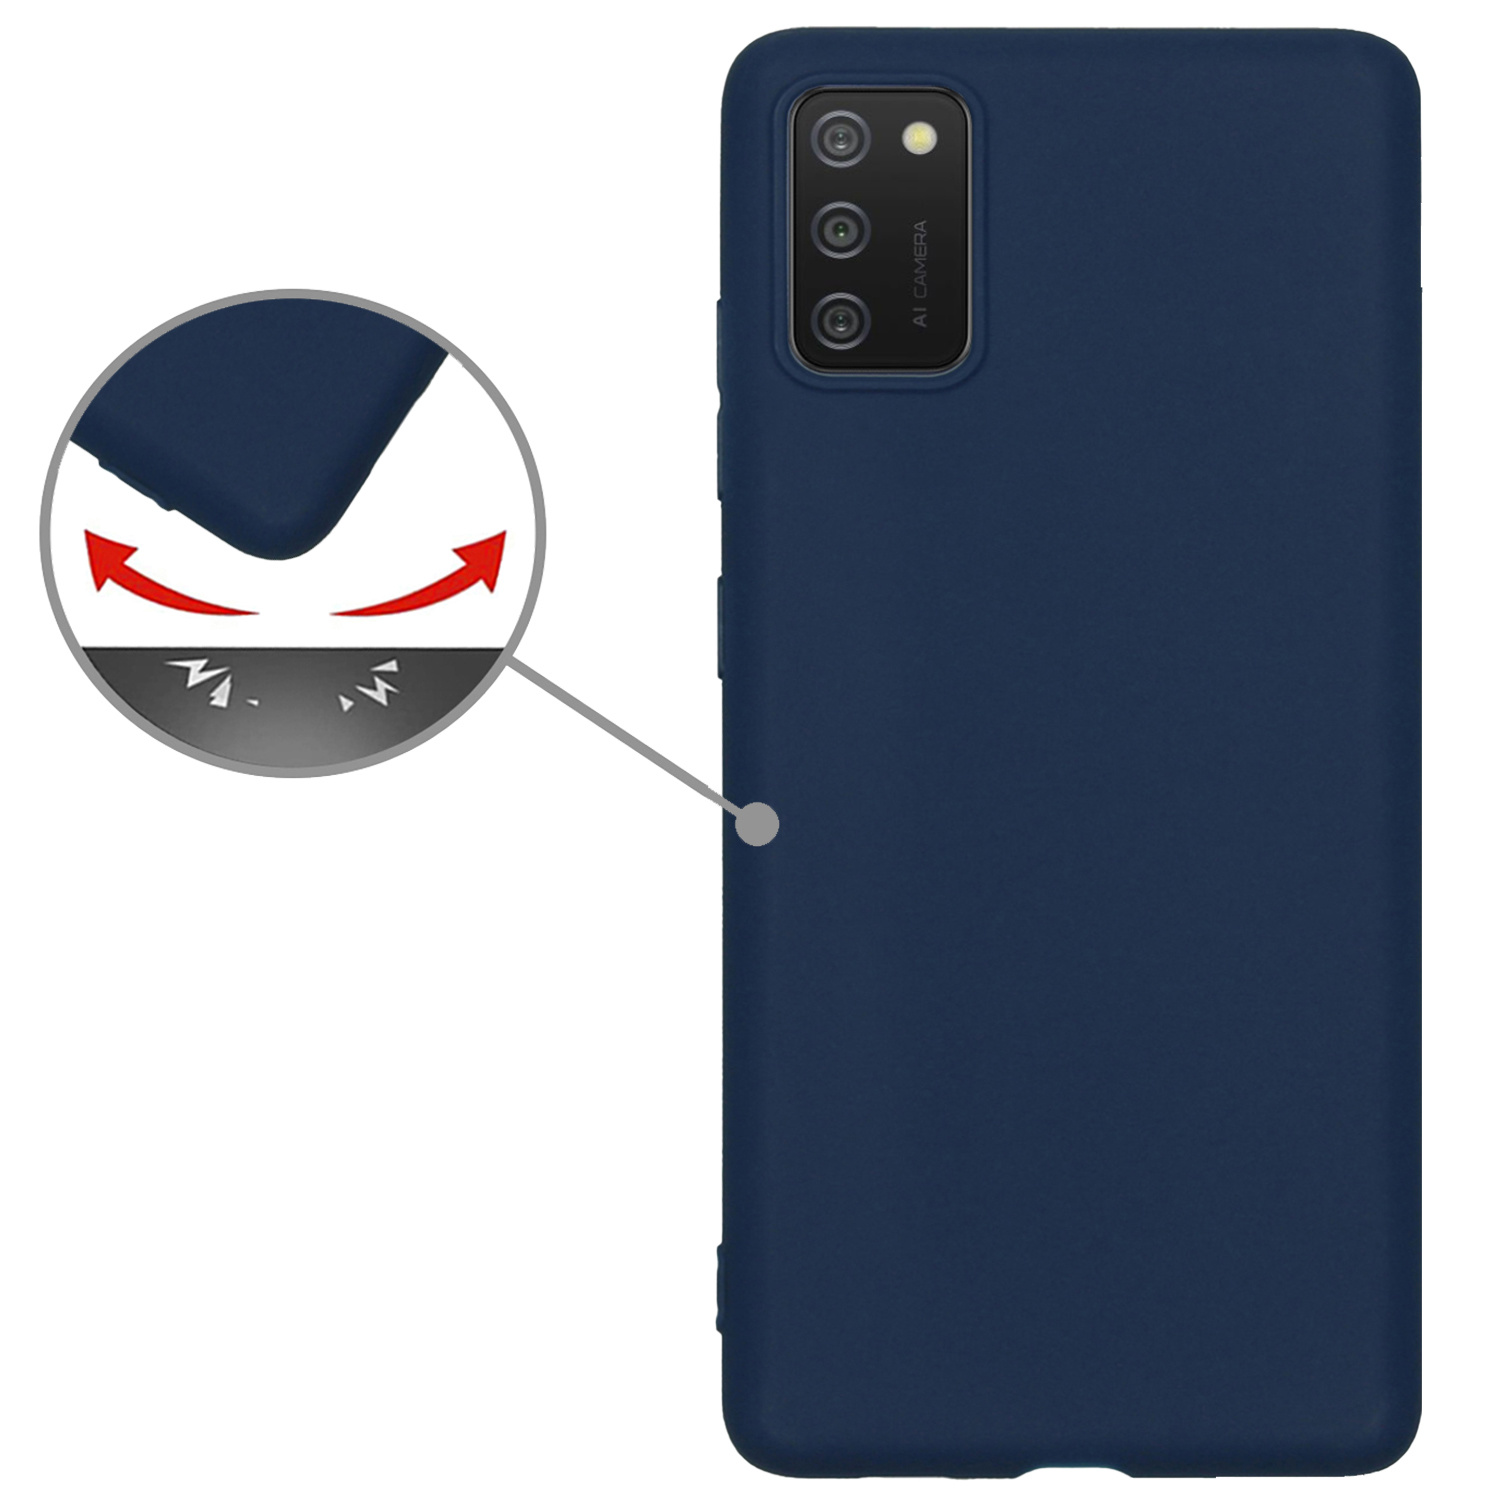 Nomfy Samsung Galaxy A03s Hoesje Siliconen - Samsung Galaxy Galaxy A03s Hoesje Donker Blauw Case - Samsung Galaxy Galaxy A03s Cover Siliconen Back Cover -Donker Blauw